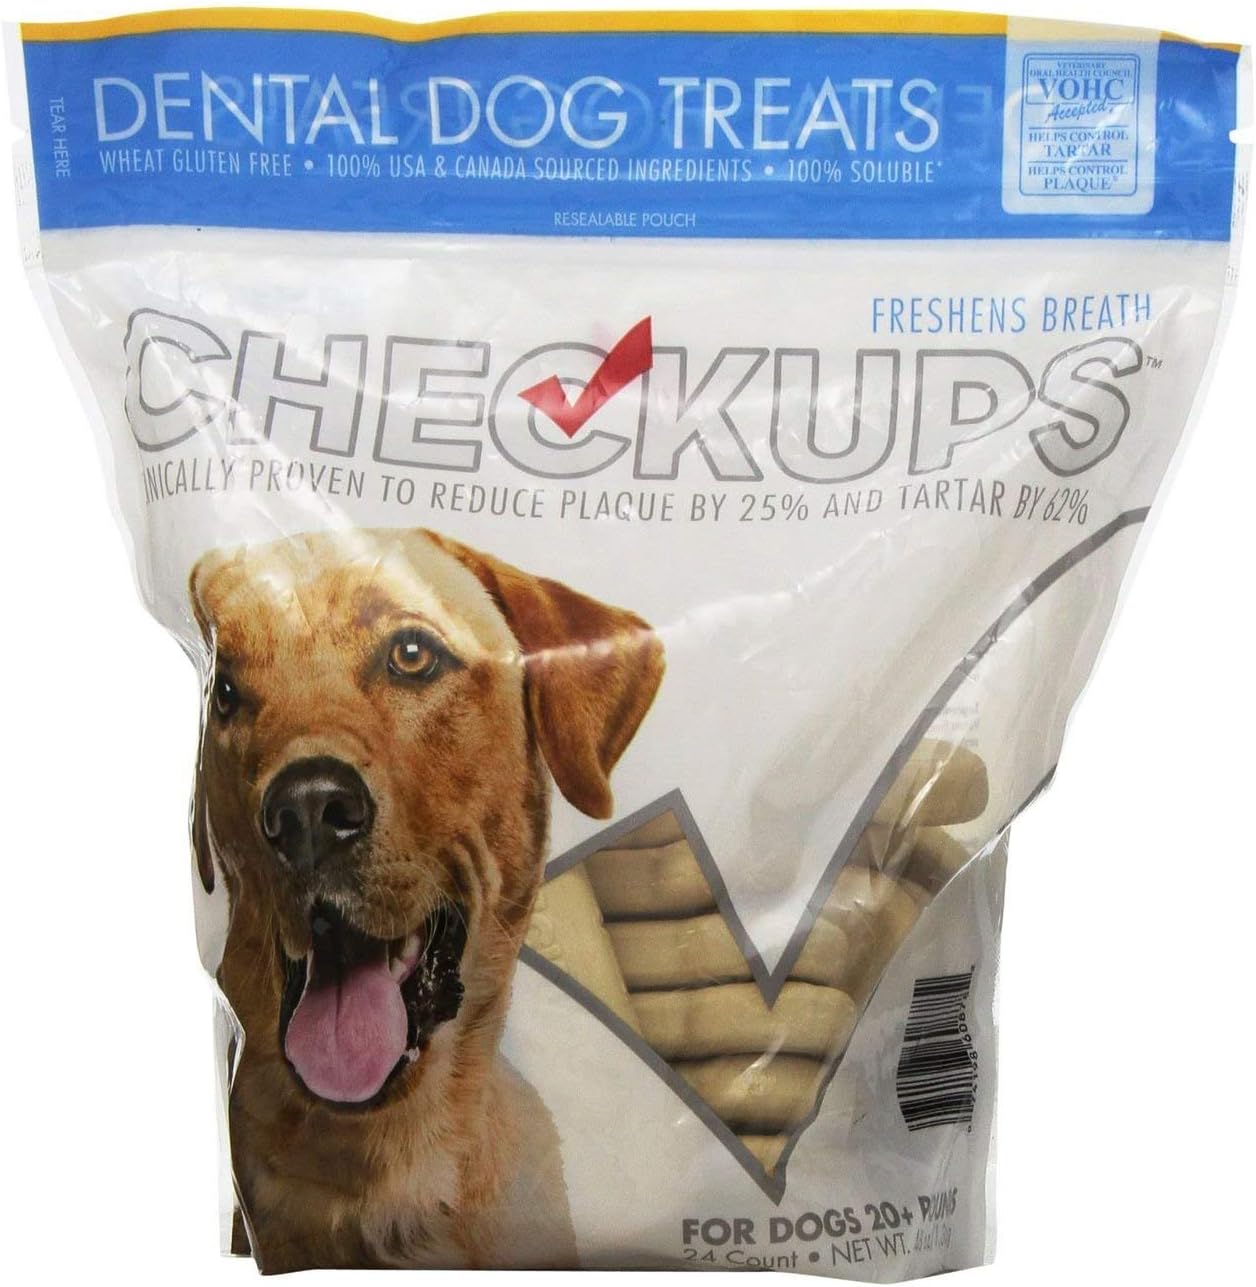 Checkups- Dental Dog Treats, 24ct 48 oz. for Dogs (Pack of 2) fj : Pet Supplies